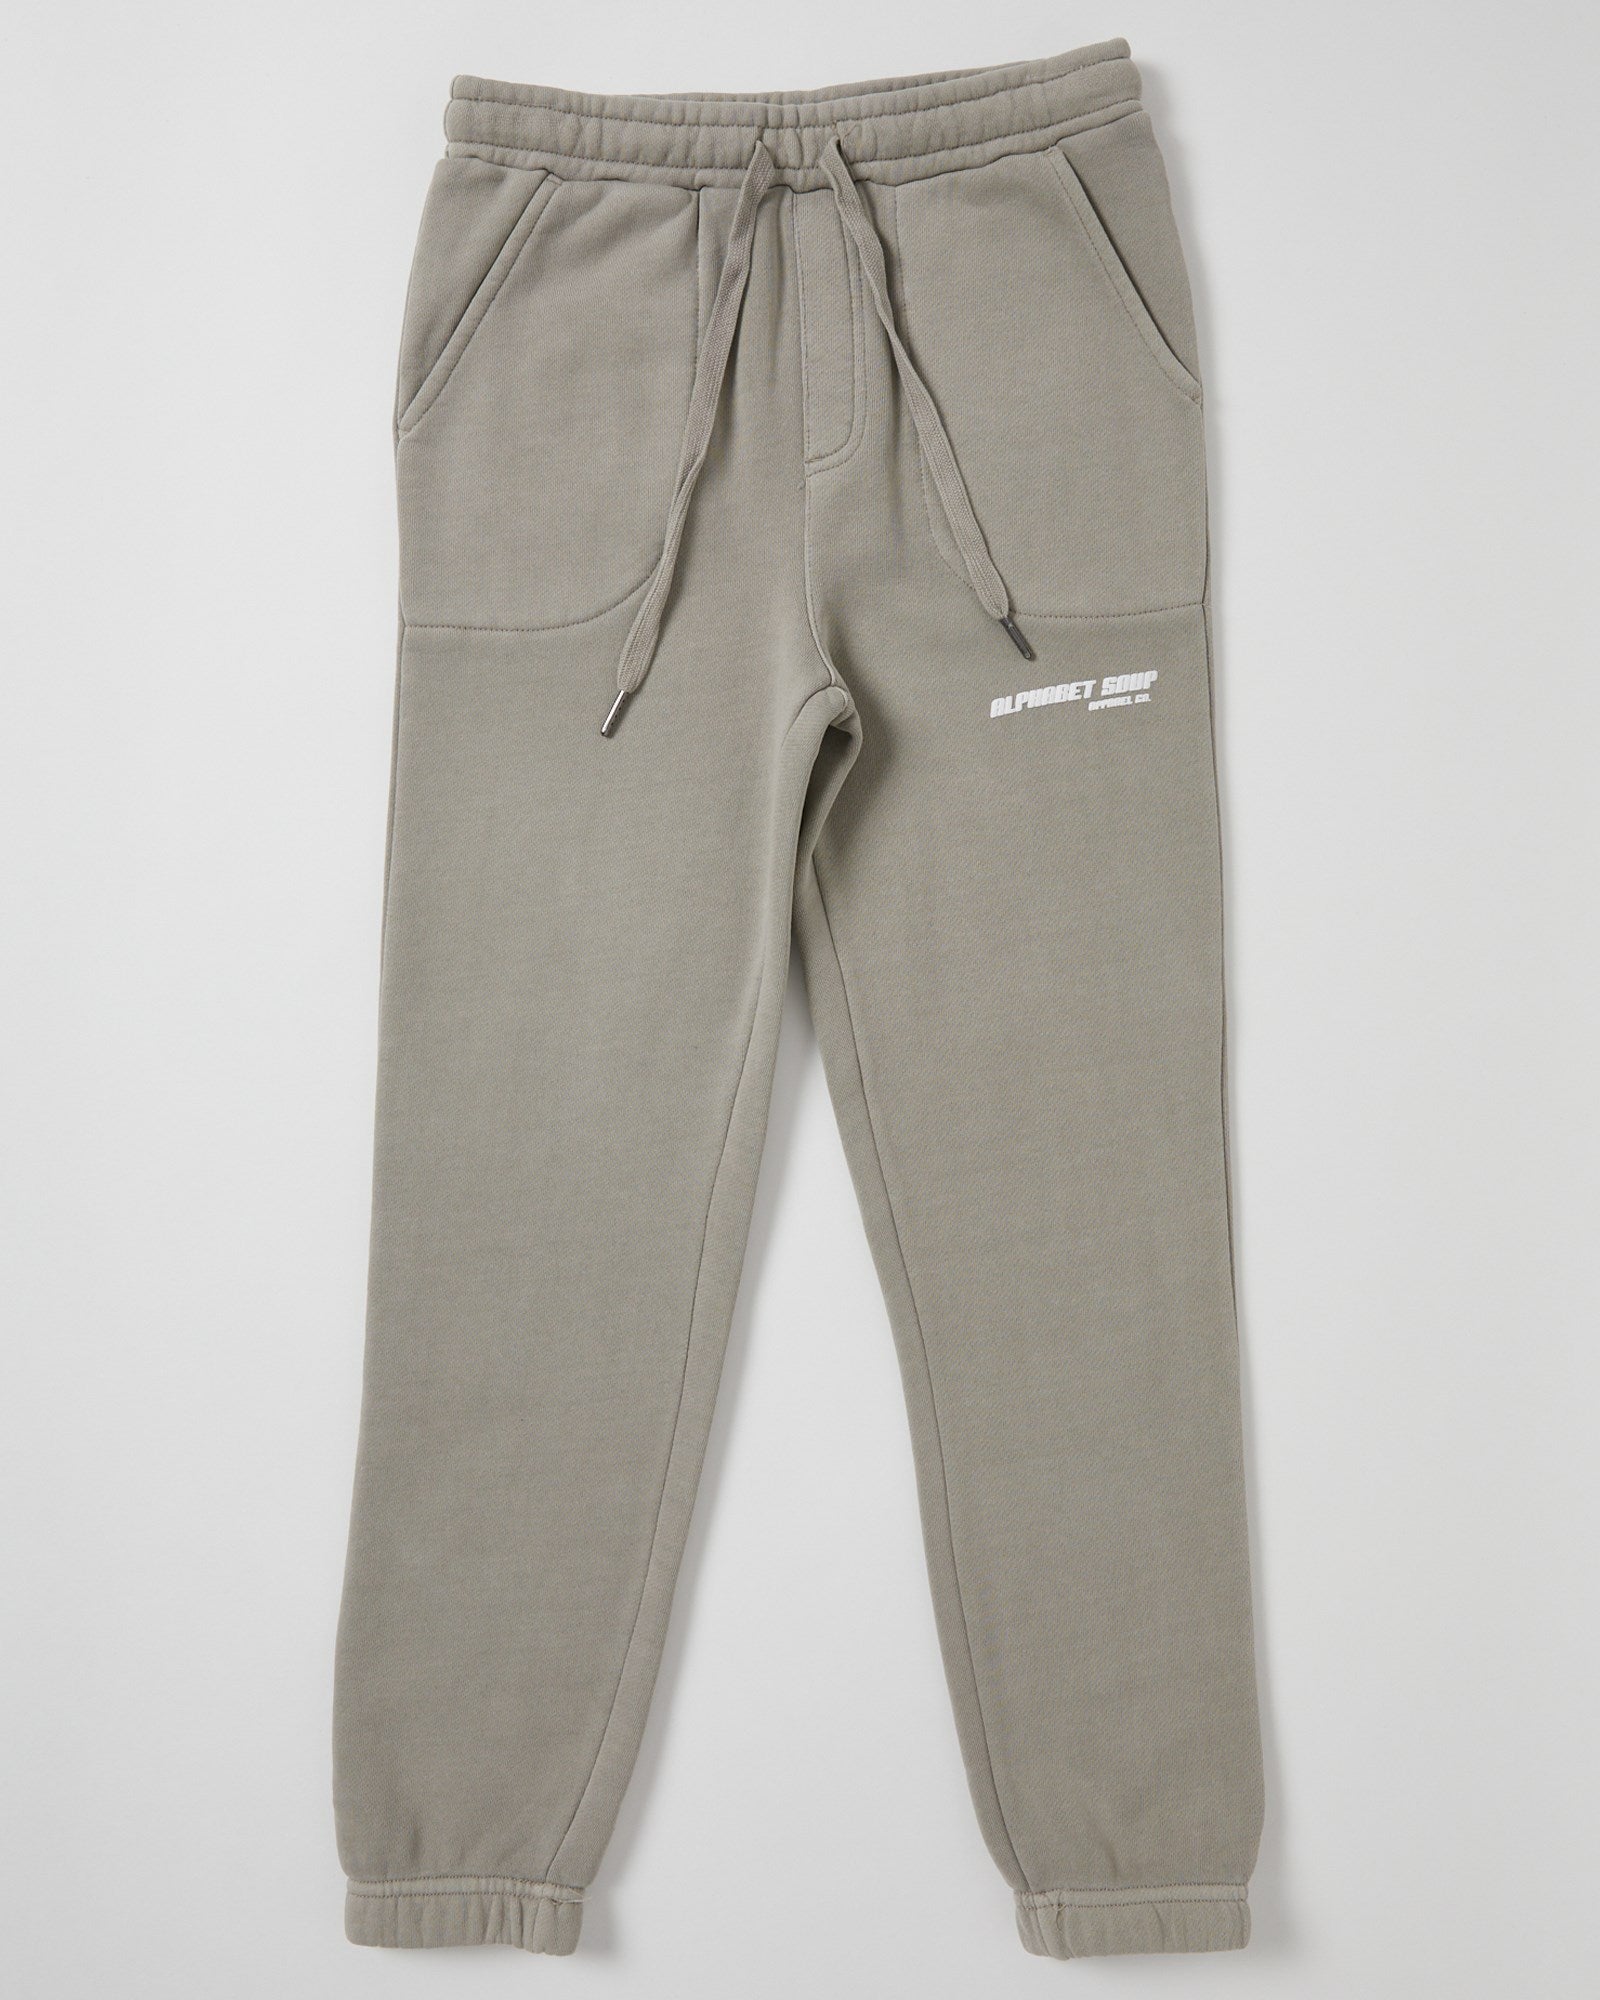 Kids San Clemente Trackpant  in concrete by Alphabet Soup featuring a vintage garment dye wash, heavy brushed back fleece, and puff print design on the front leg create the perfect blend of comfort and style. Elasticated waist and ribbed cuff ankles ensure an all-day fit.